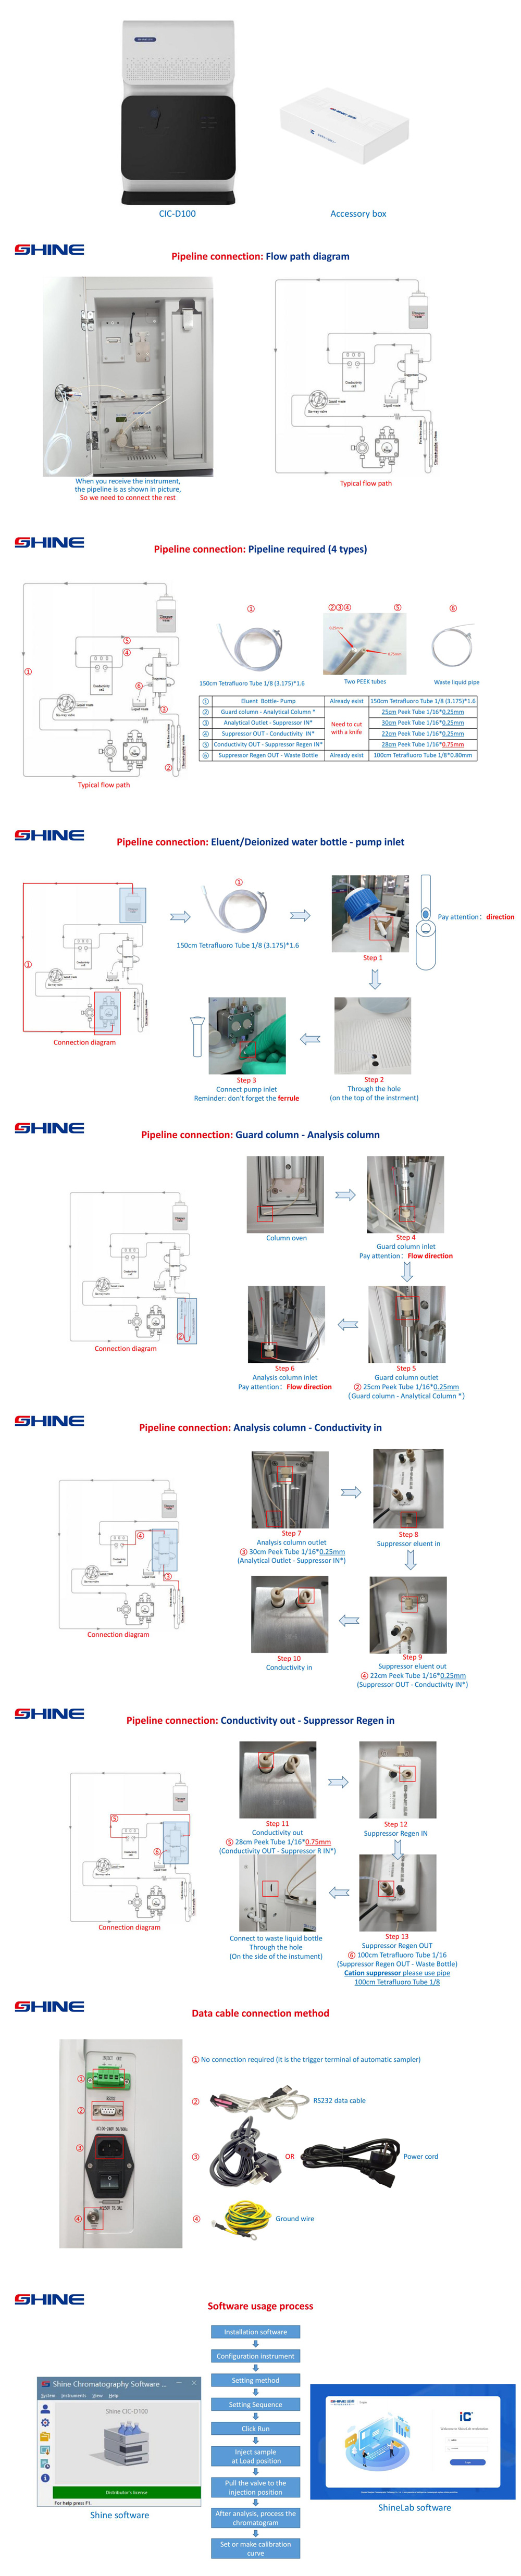 CIC-D100-Installation-Guide(Manual-injection)_00.jpg